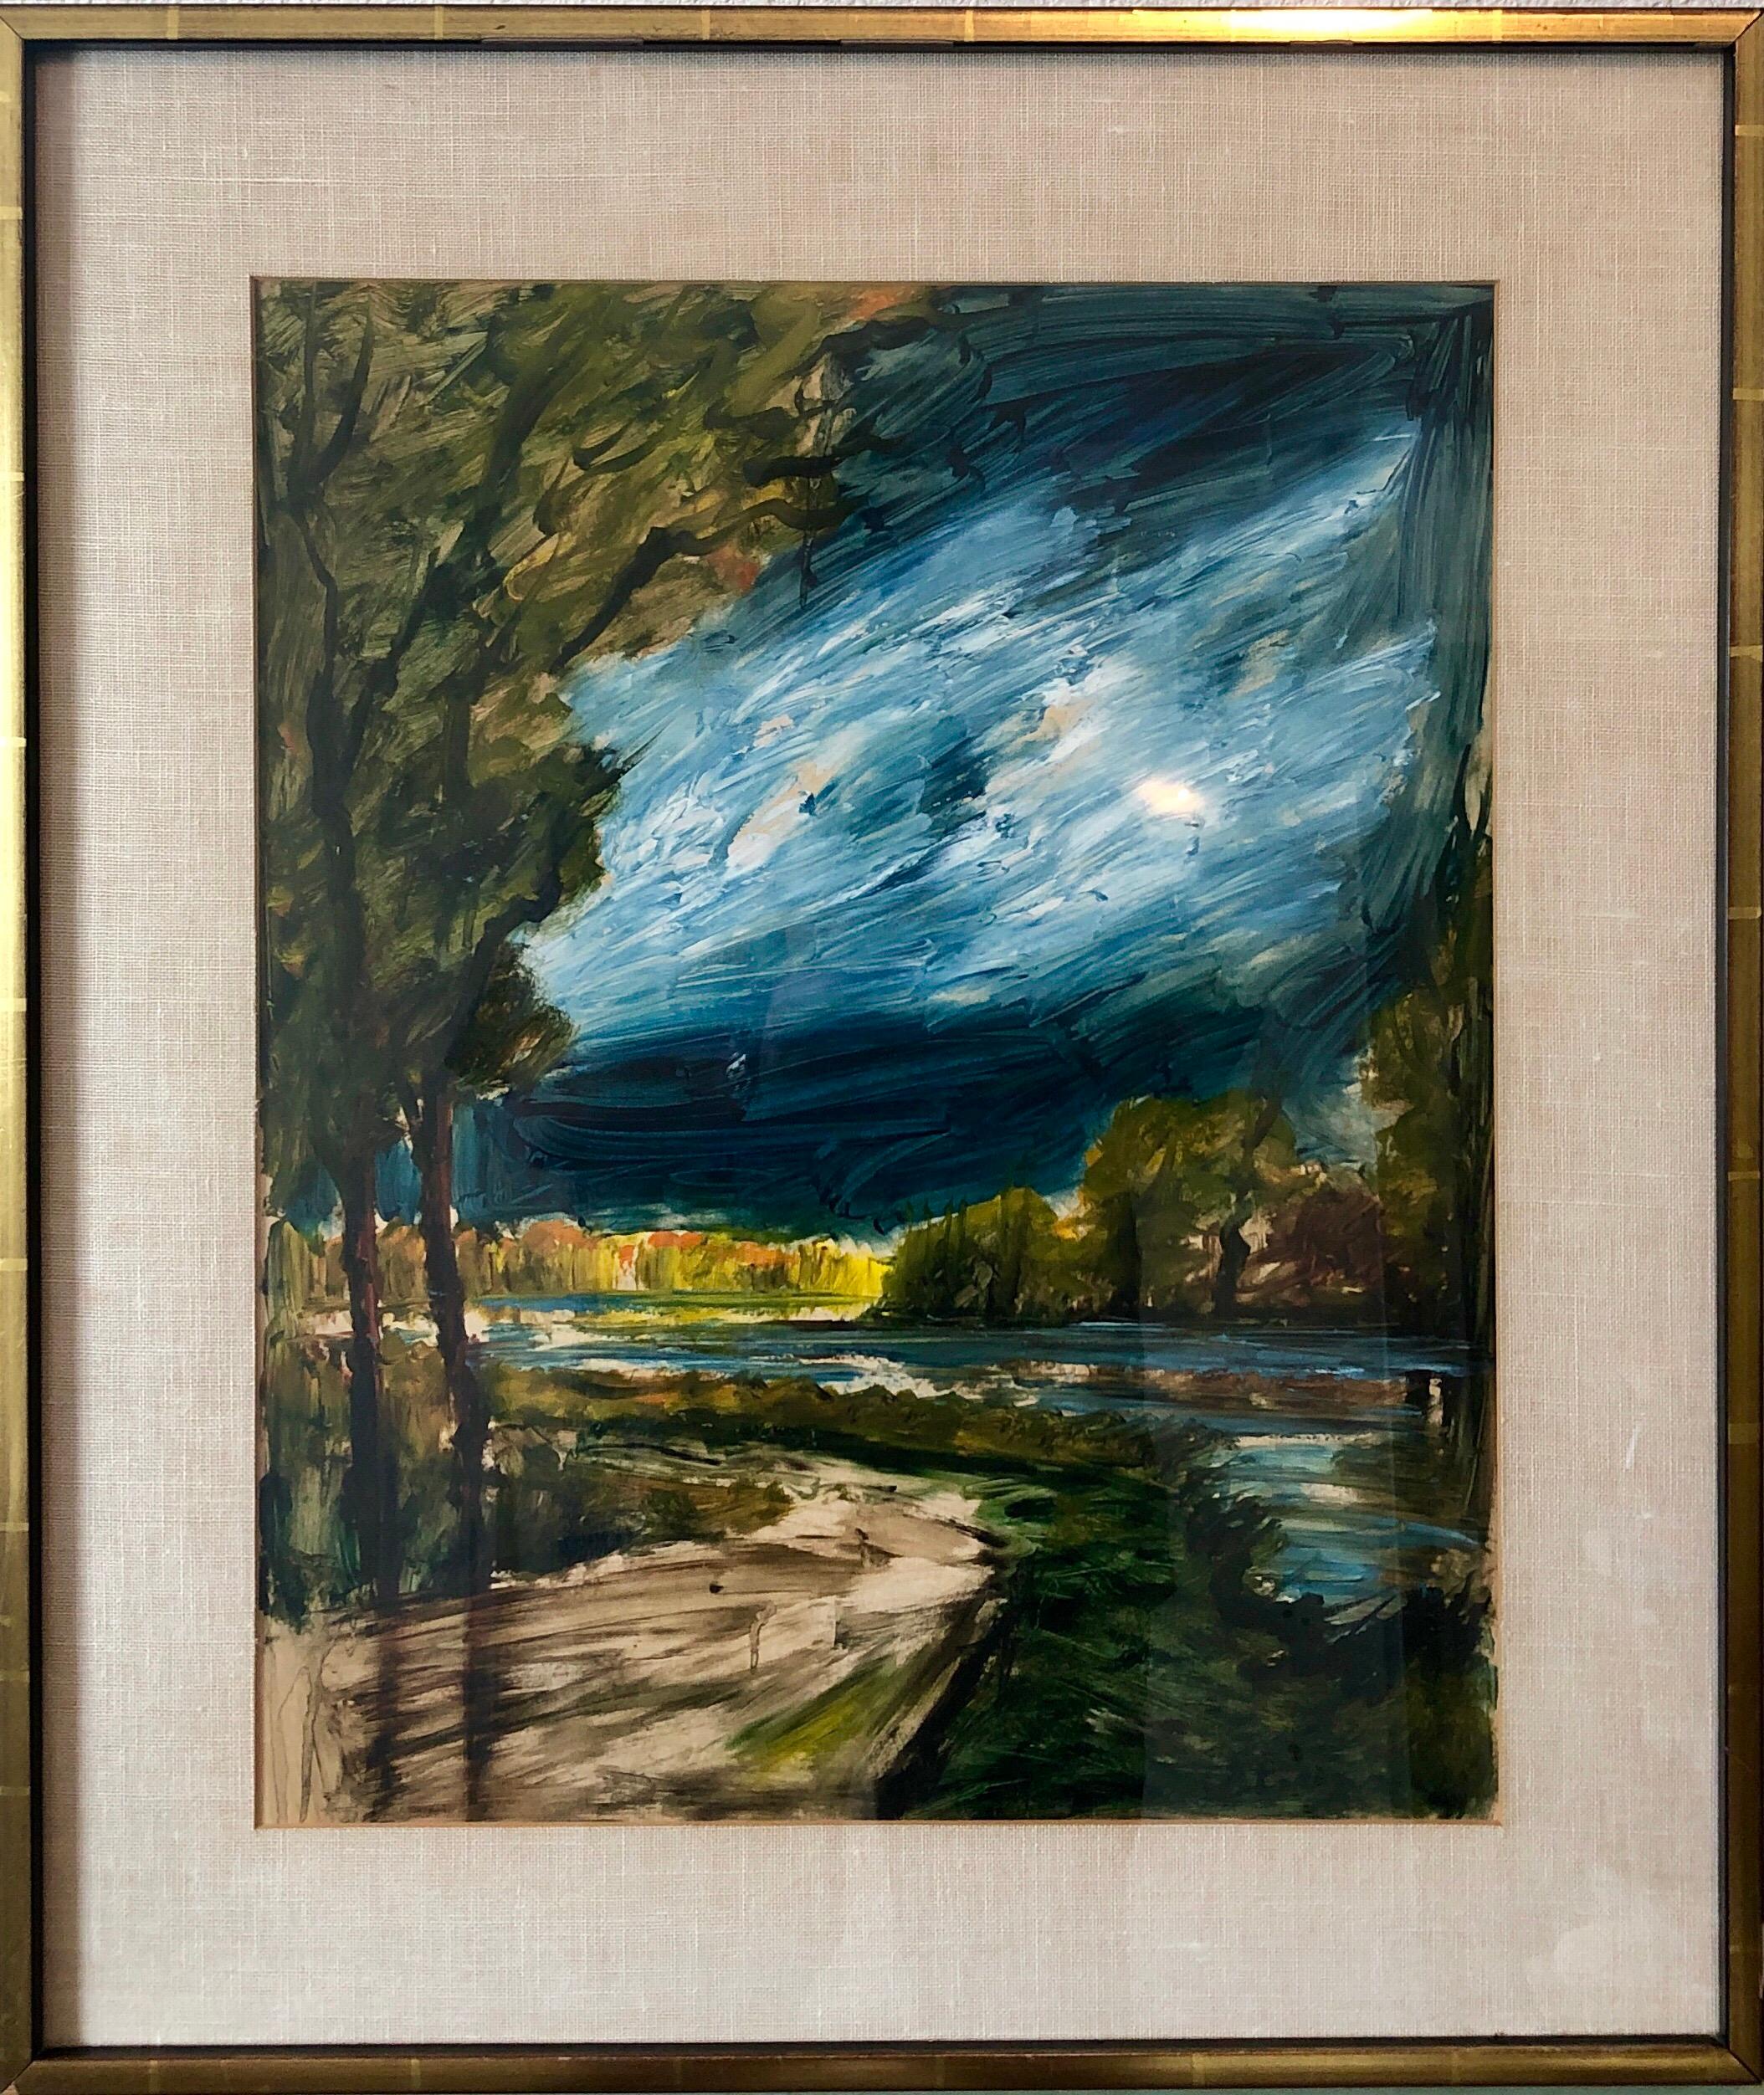 Beautiful gouache on paper, Moody atmospheric landscape in shades of black, blue green and gold by French artist, Roger Etienne Everaert Ret, signed on top right.
Roger Etienne, French/American (1922 - )

Roger Etienne
The painter Roger Etienne was